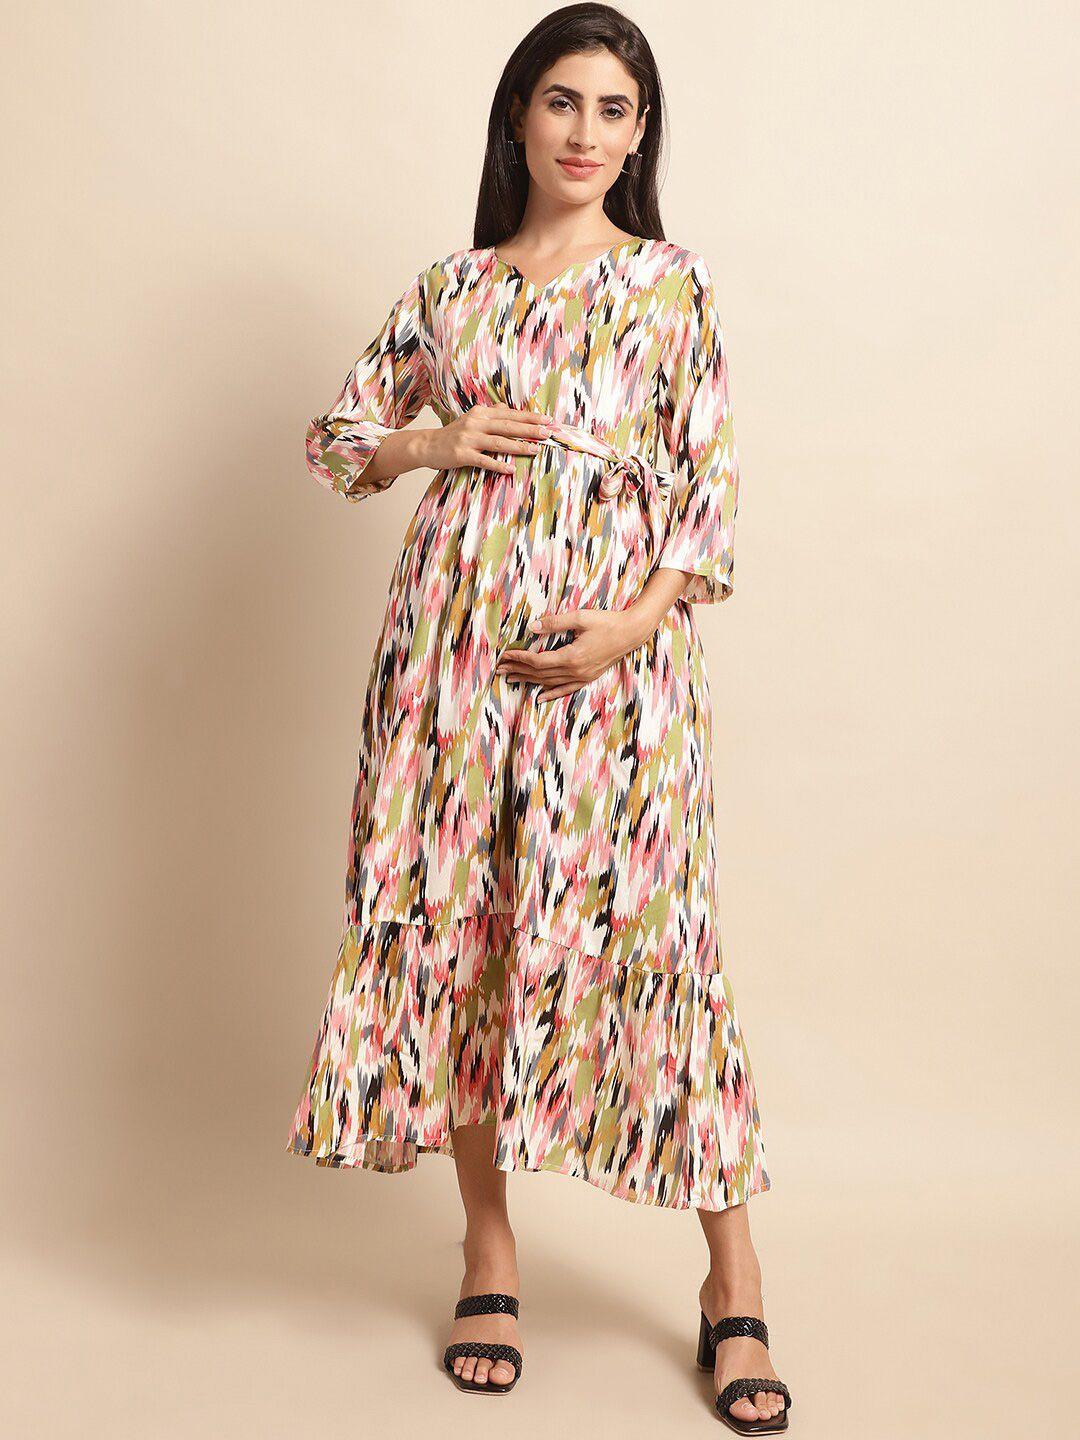 frempy multicoloured floral print tie-up neck bell sleeve maternity fit & flare midi dress